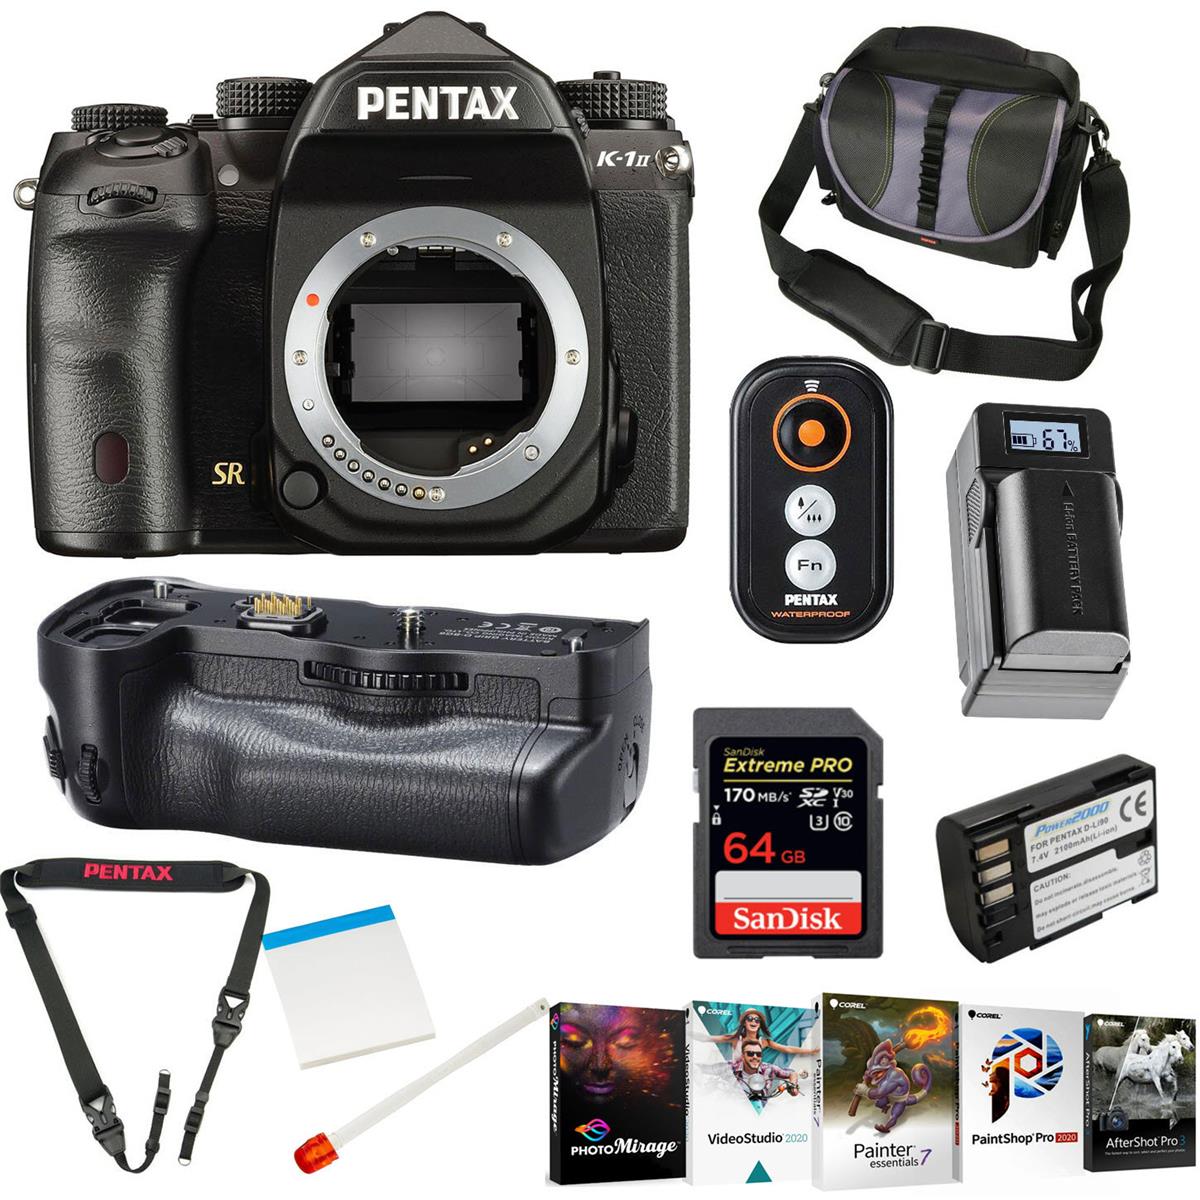 Pentax K-1 Mark II DSLR Camera (Body Only) with Premium Accessory Bundle -  15994 D